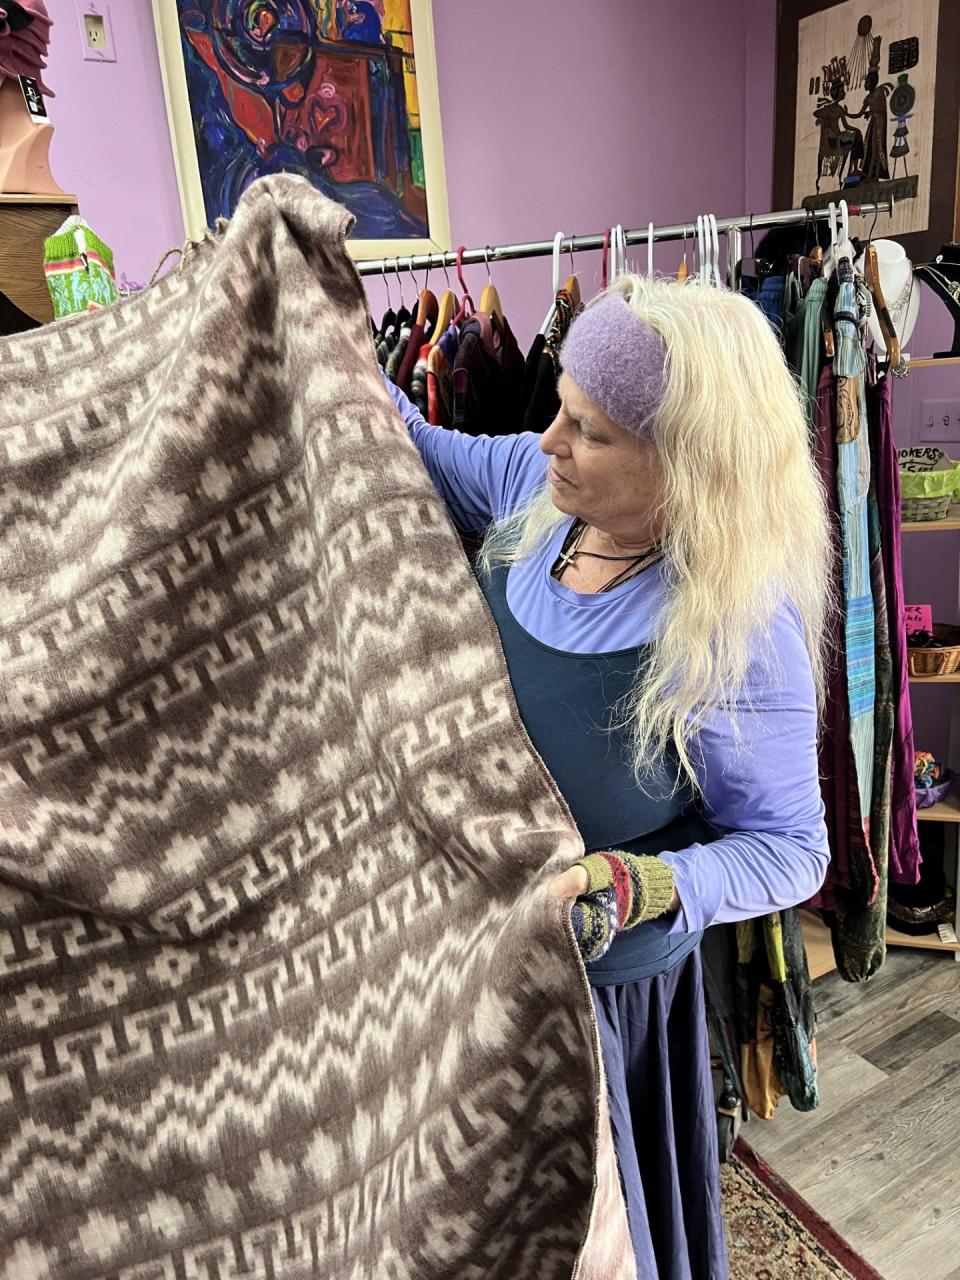 Laurie Zalla, owner of Silver and Scents, shows off an alpaca blanket available in her Ravenna store.